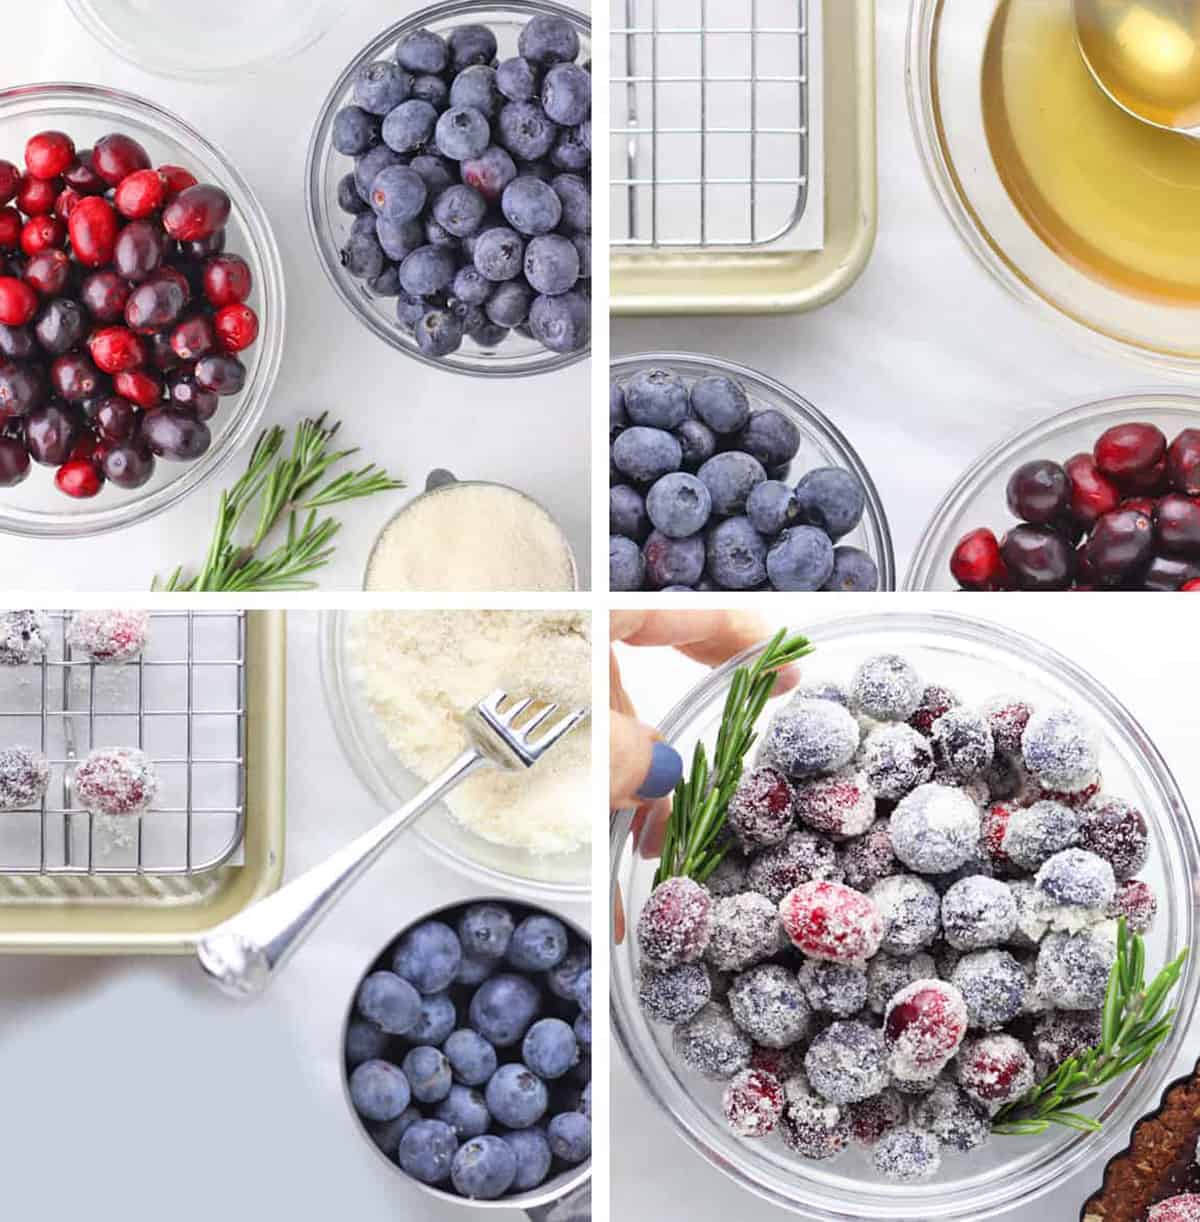 steps to make sugared berries.